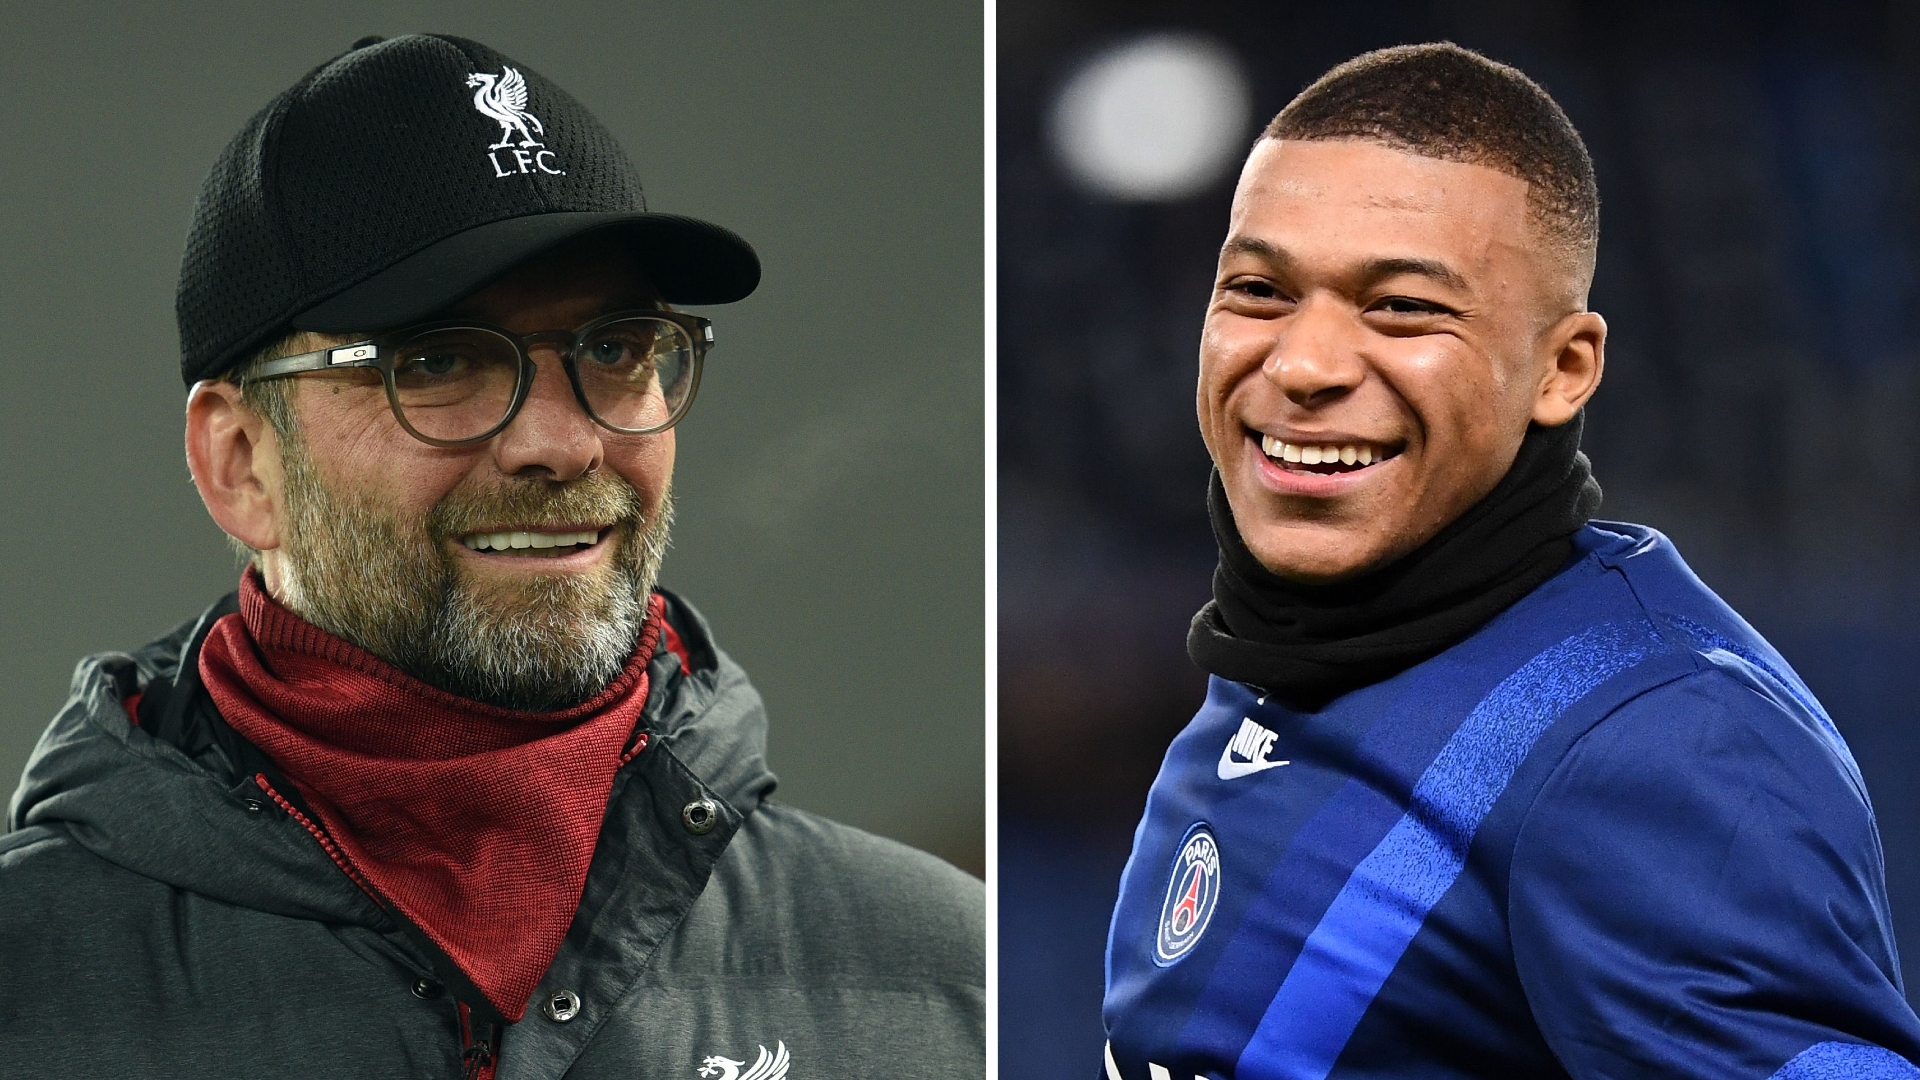 Mbappe to Liverpool? Klopp says there isn't a club in the world that could afford PSG star | Goal.com